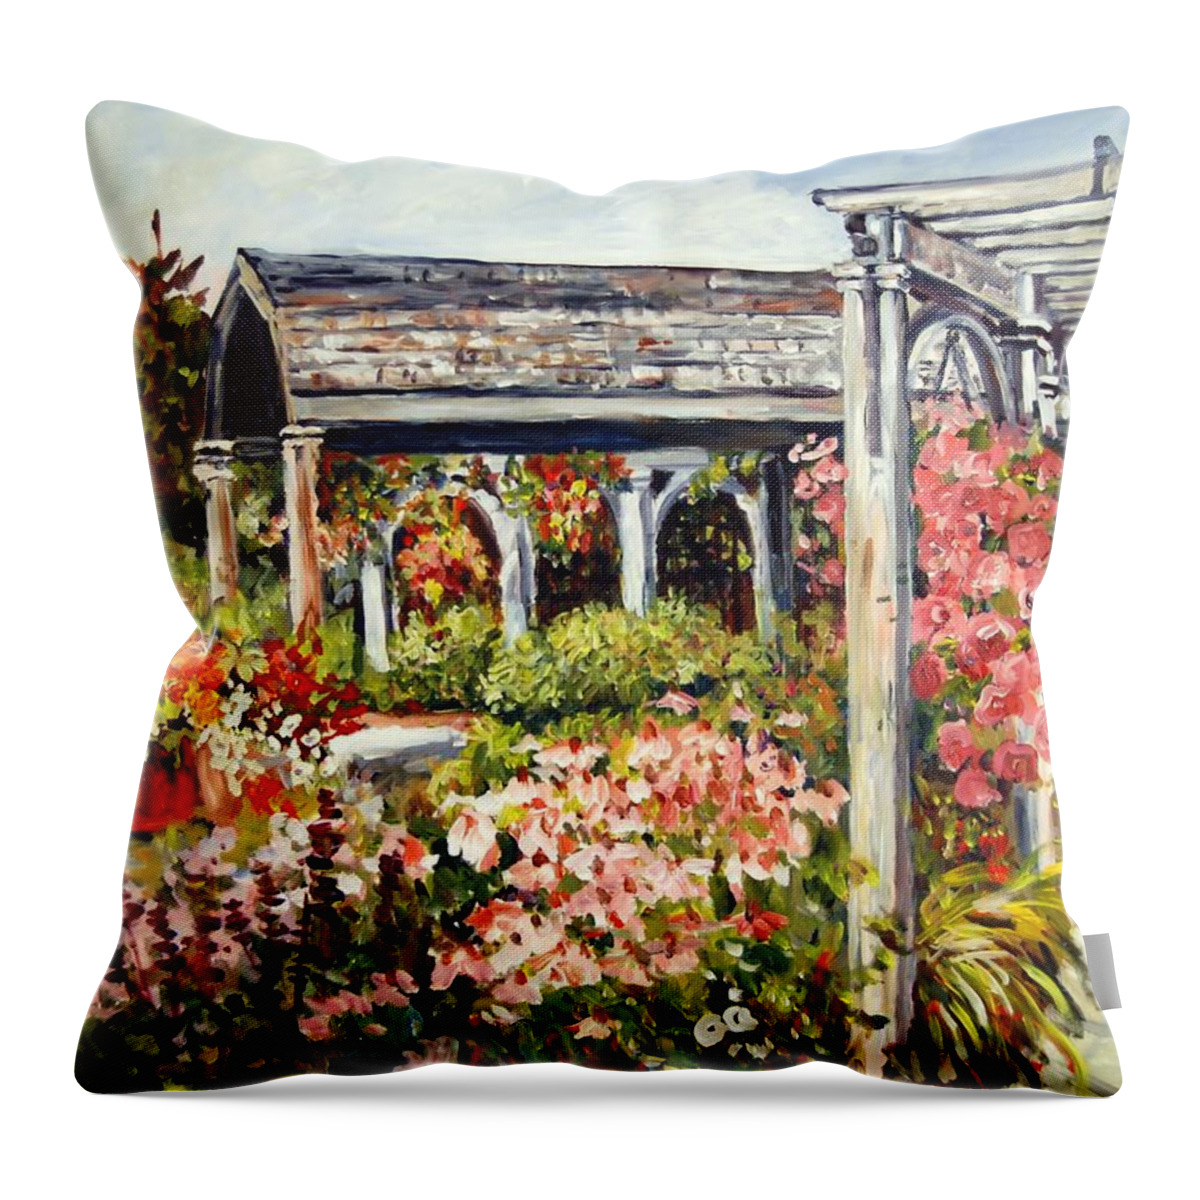 Landscape Throw Pillow featuring the painting Klehm Arboretum I by Ingrid Dohm